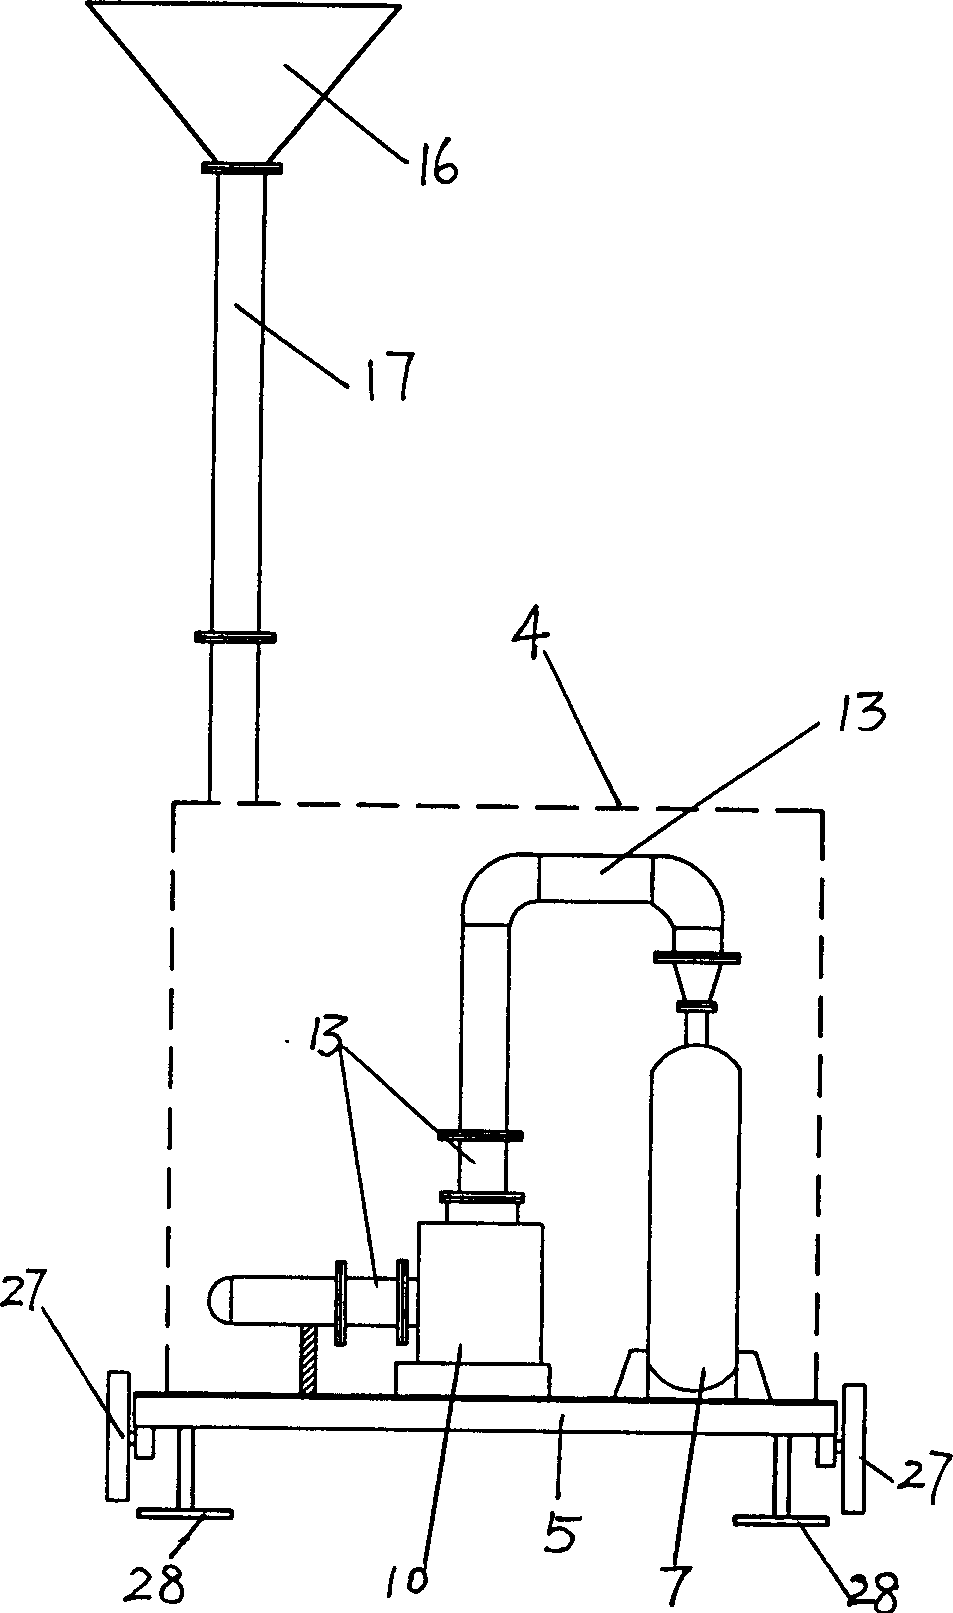 Garbage filling and burying gas test and torch device